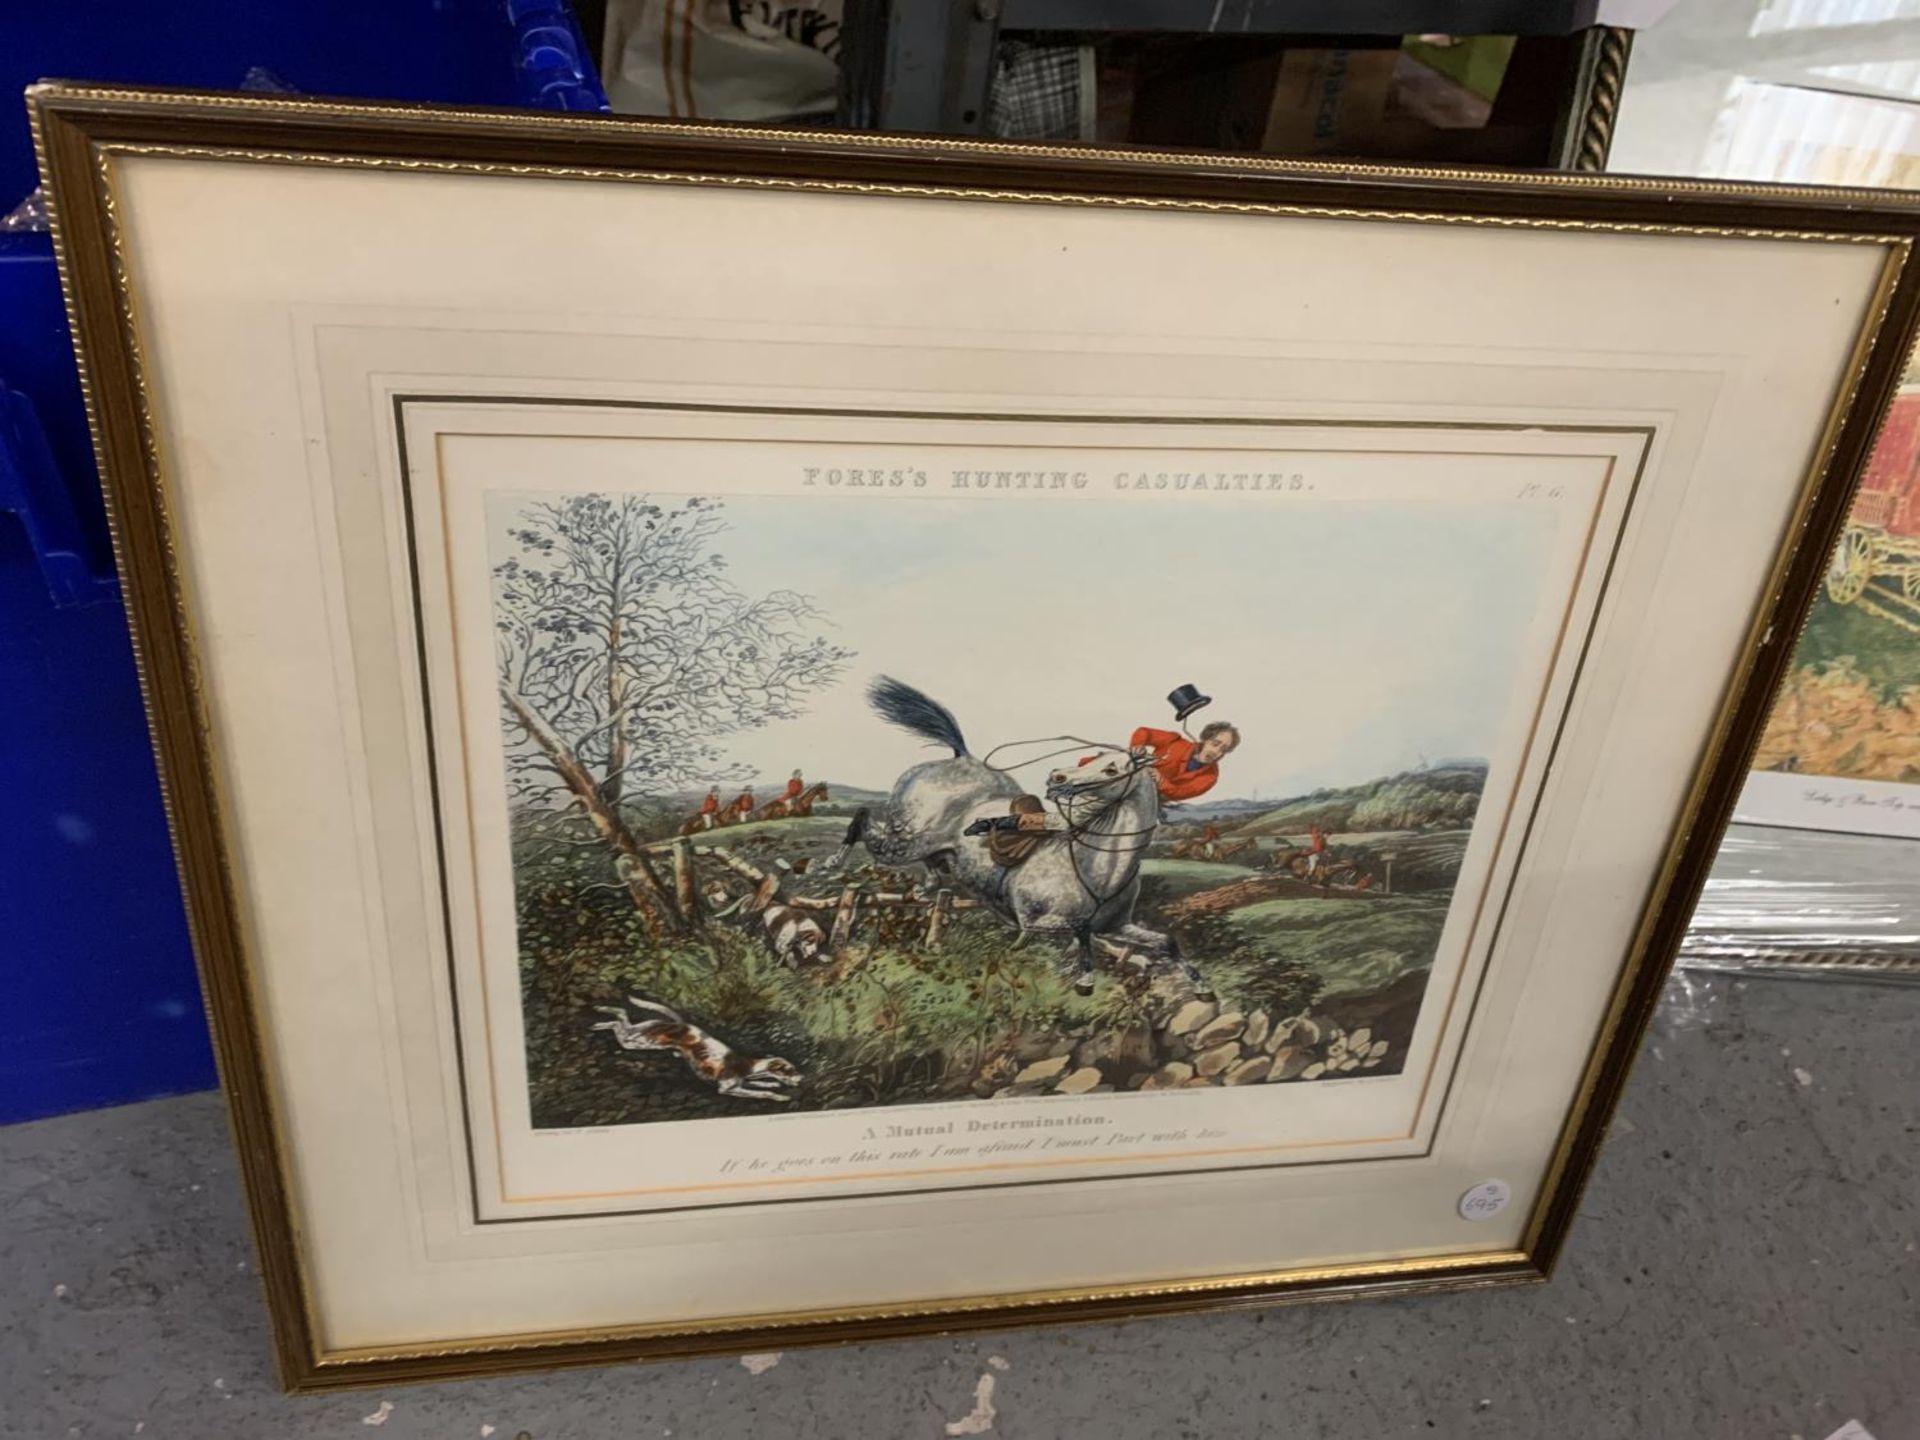 FOUR FRAMED FORES'S HUNTING PRINTS - Image 5 of 5